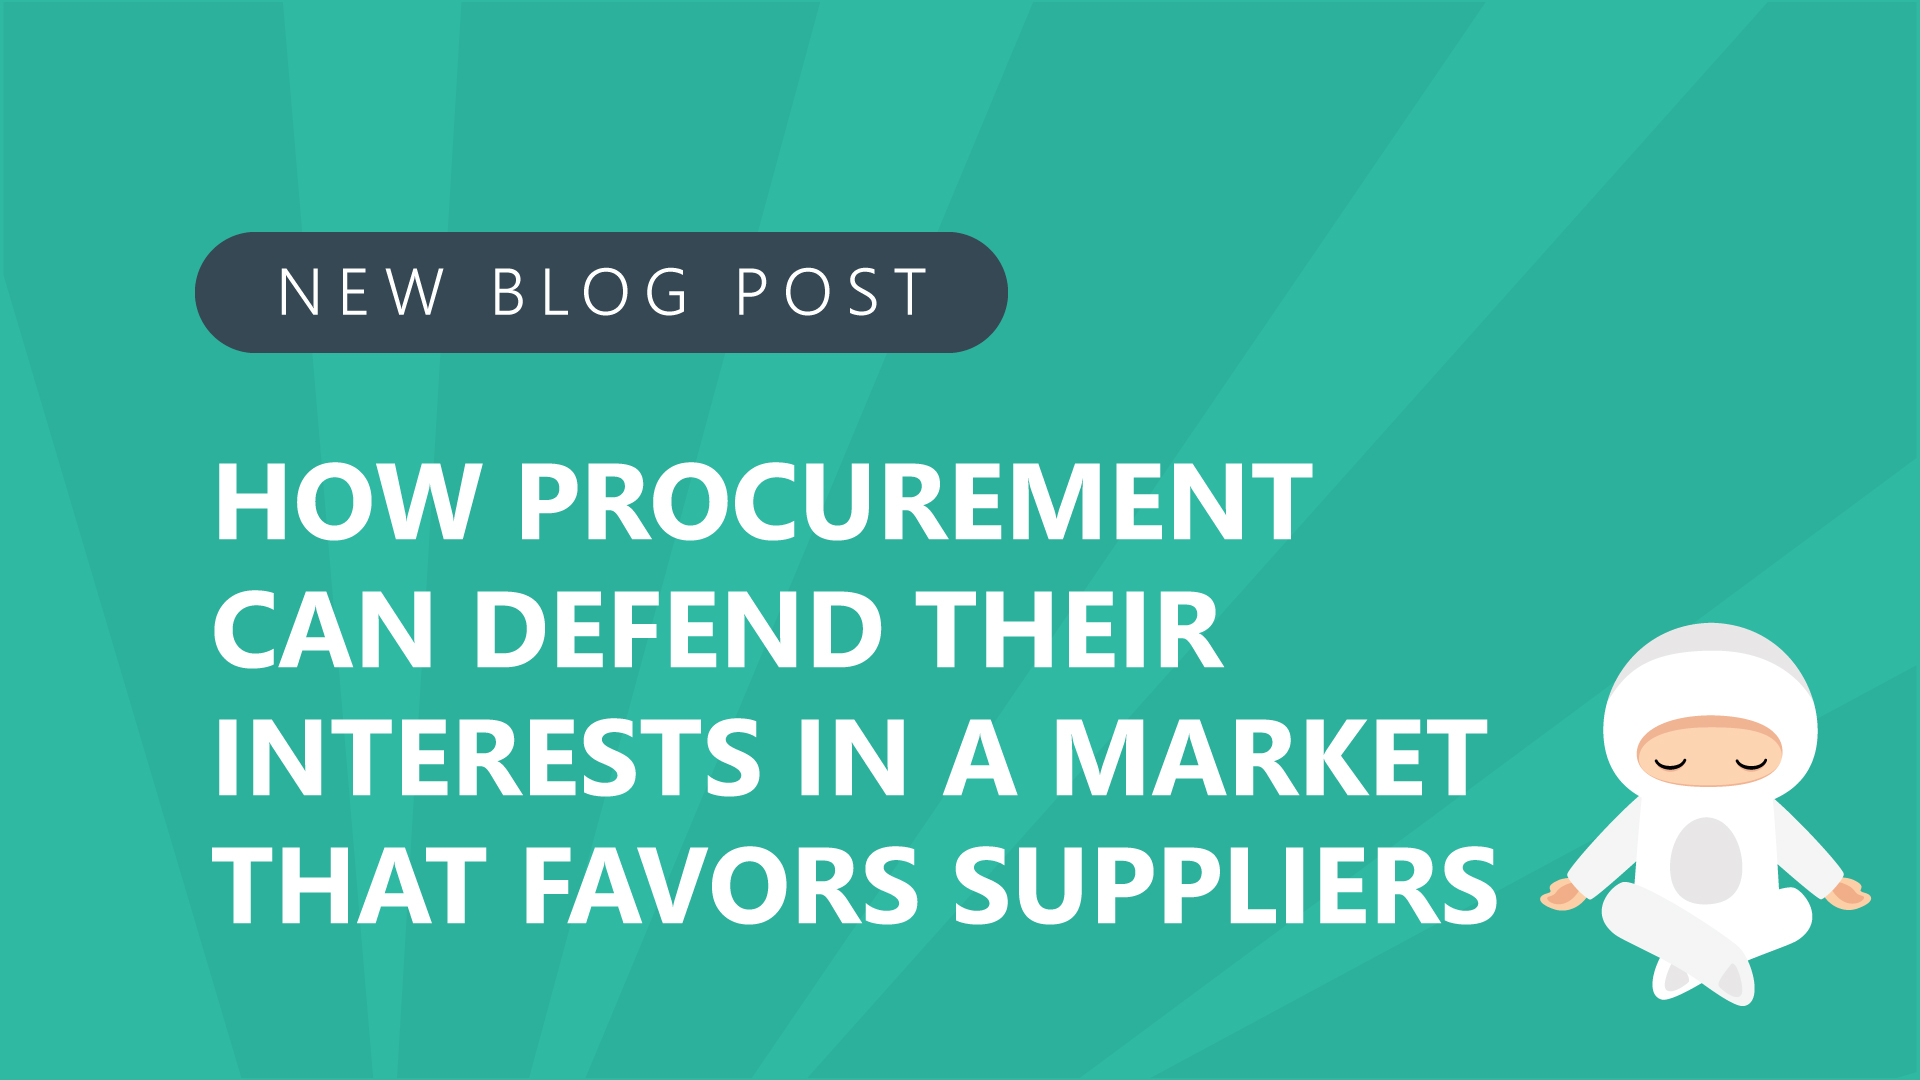 How procurement can defend their interests in a market that favors suppliers